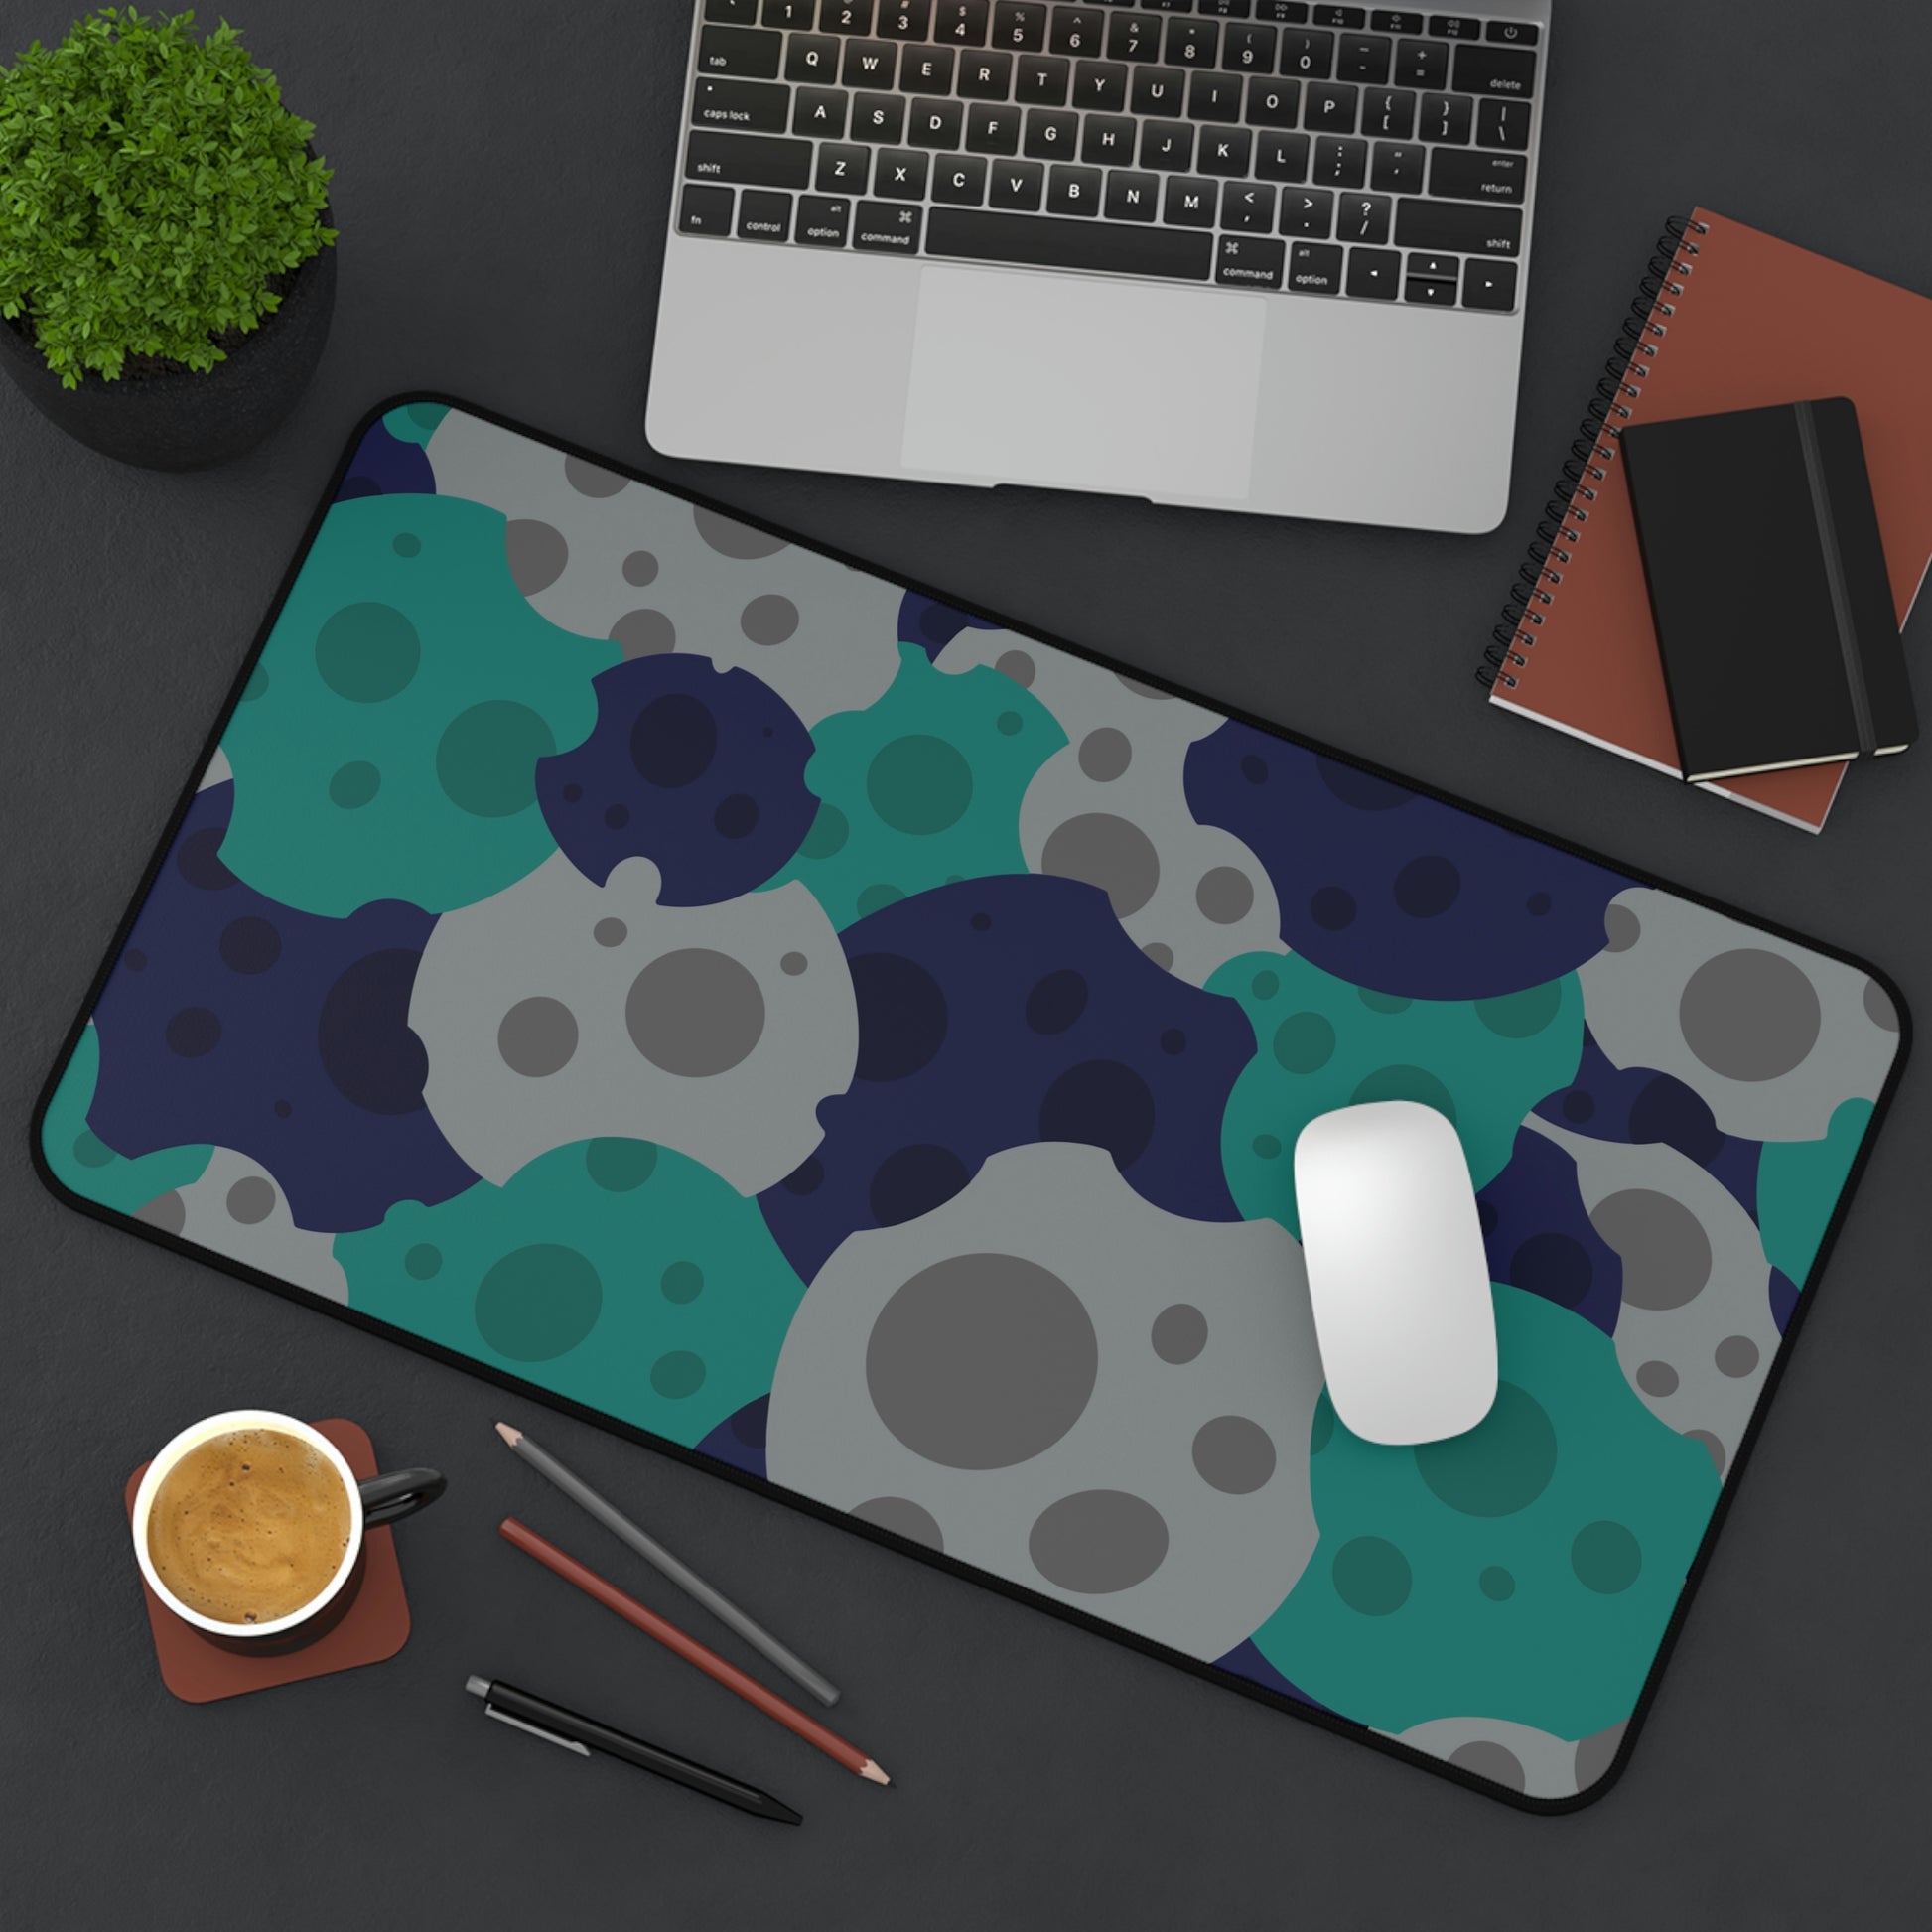 A 12" x 22" desk mat with gray, teal, and dark blue meteorites sitting at an angle.